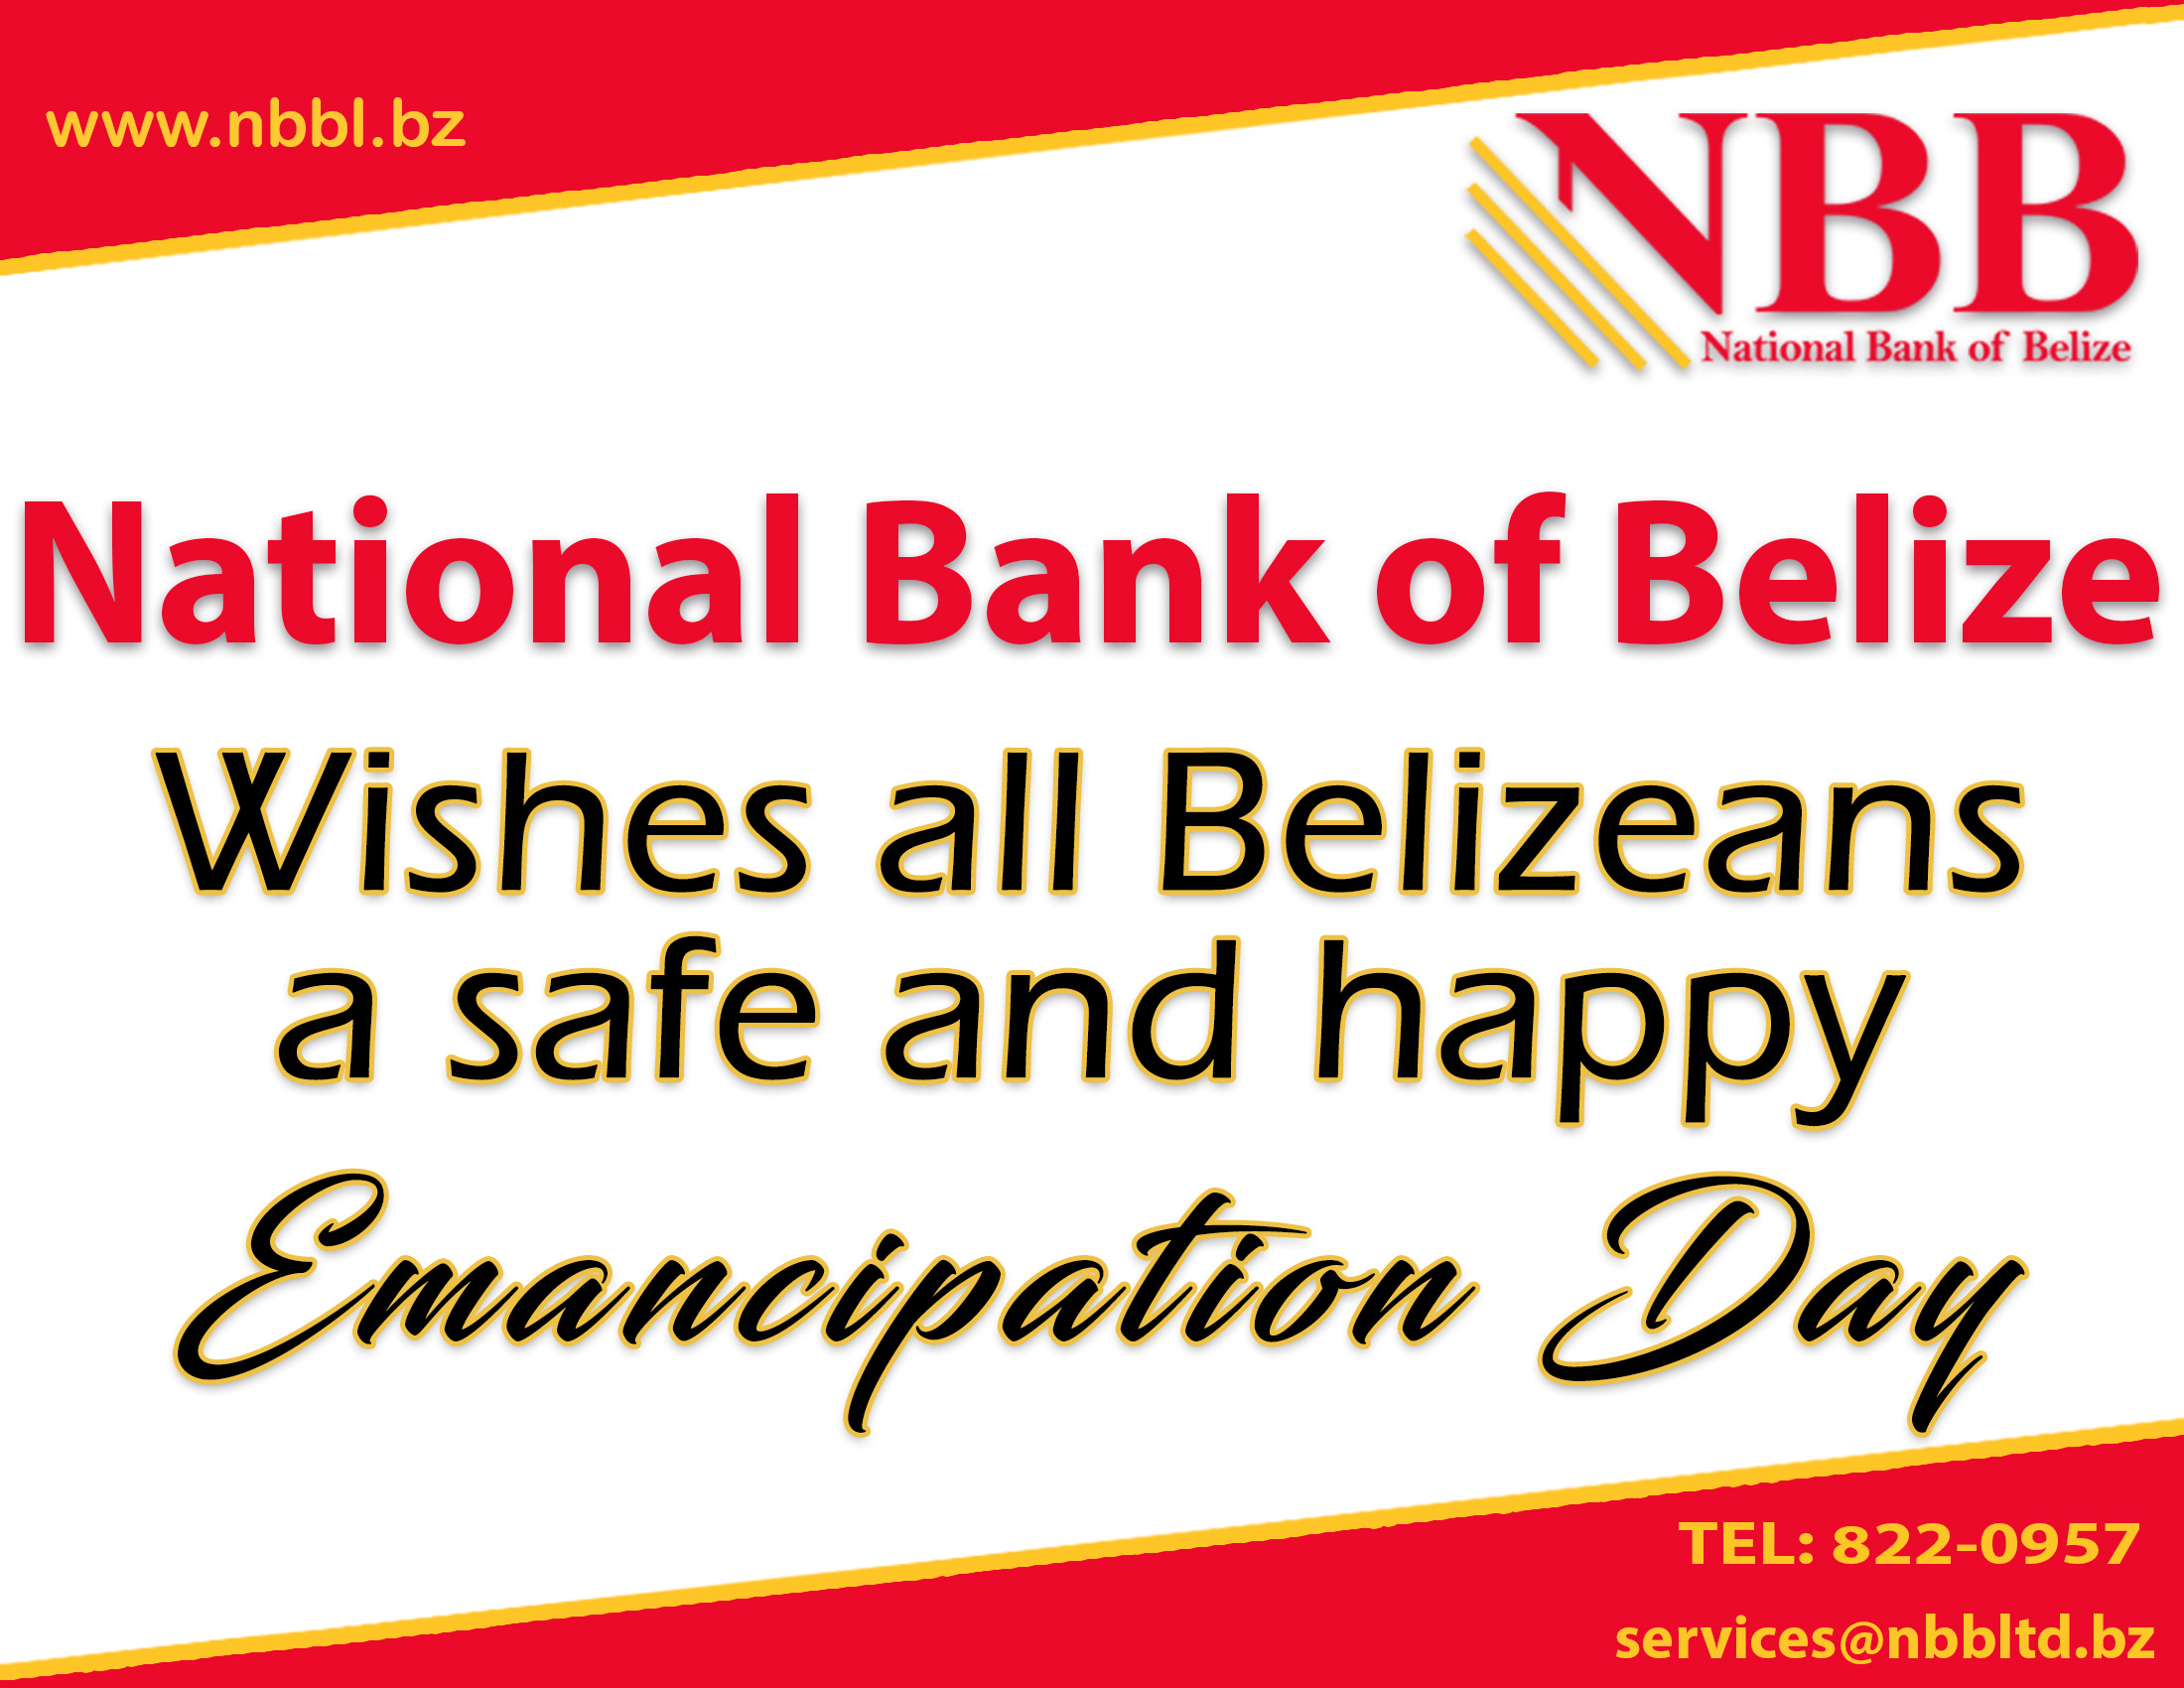 Happy Emancipation Day National Bank of Belize